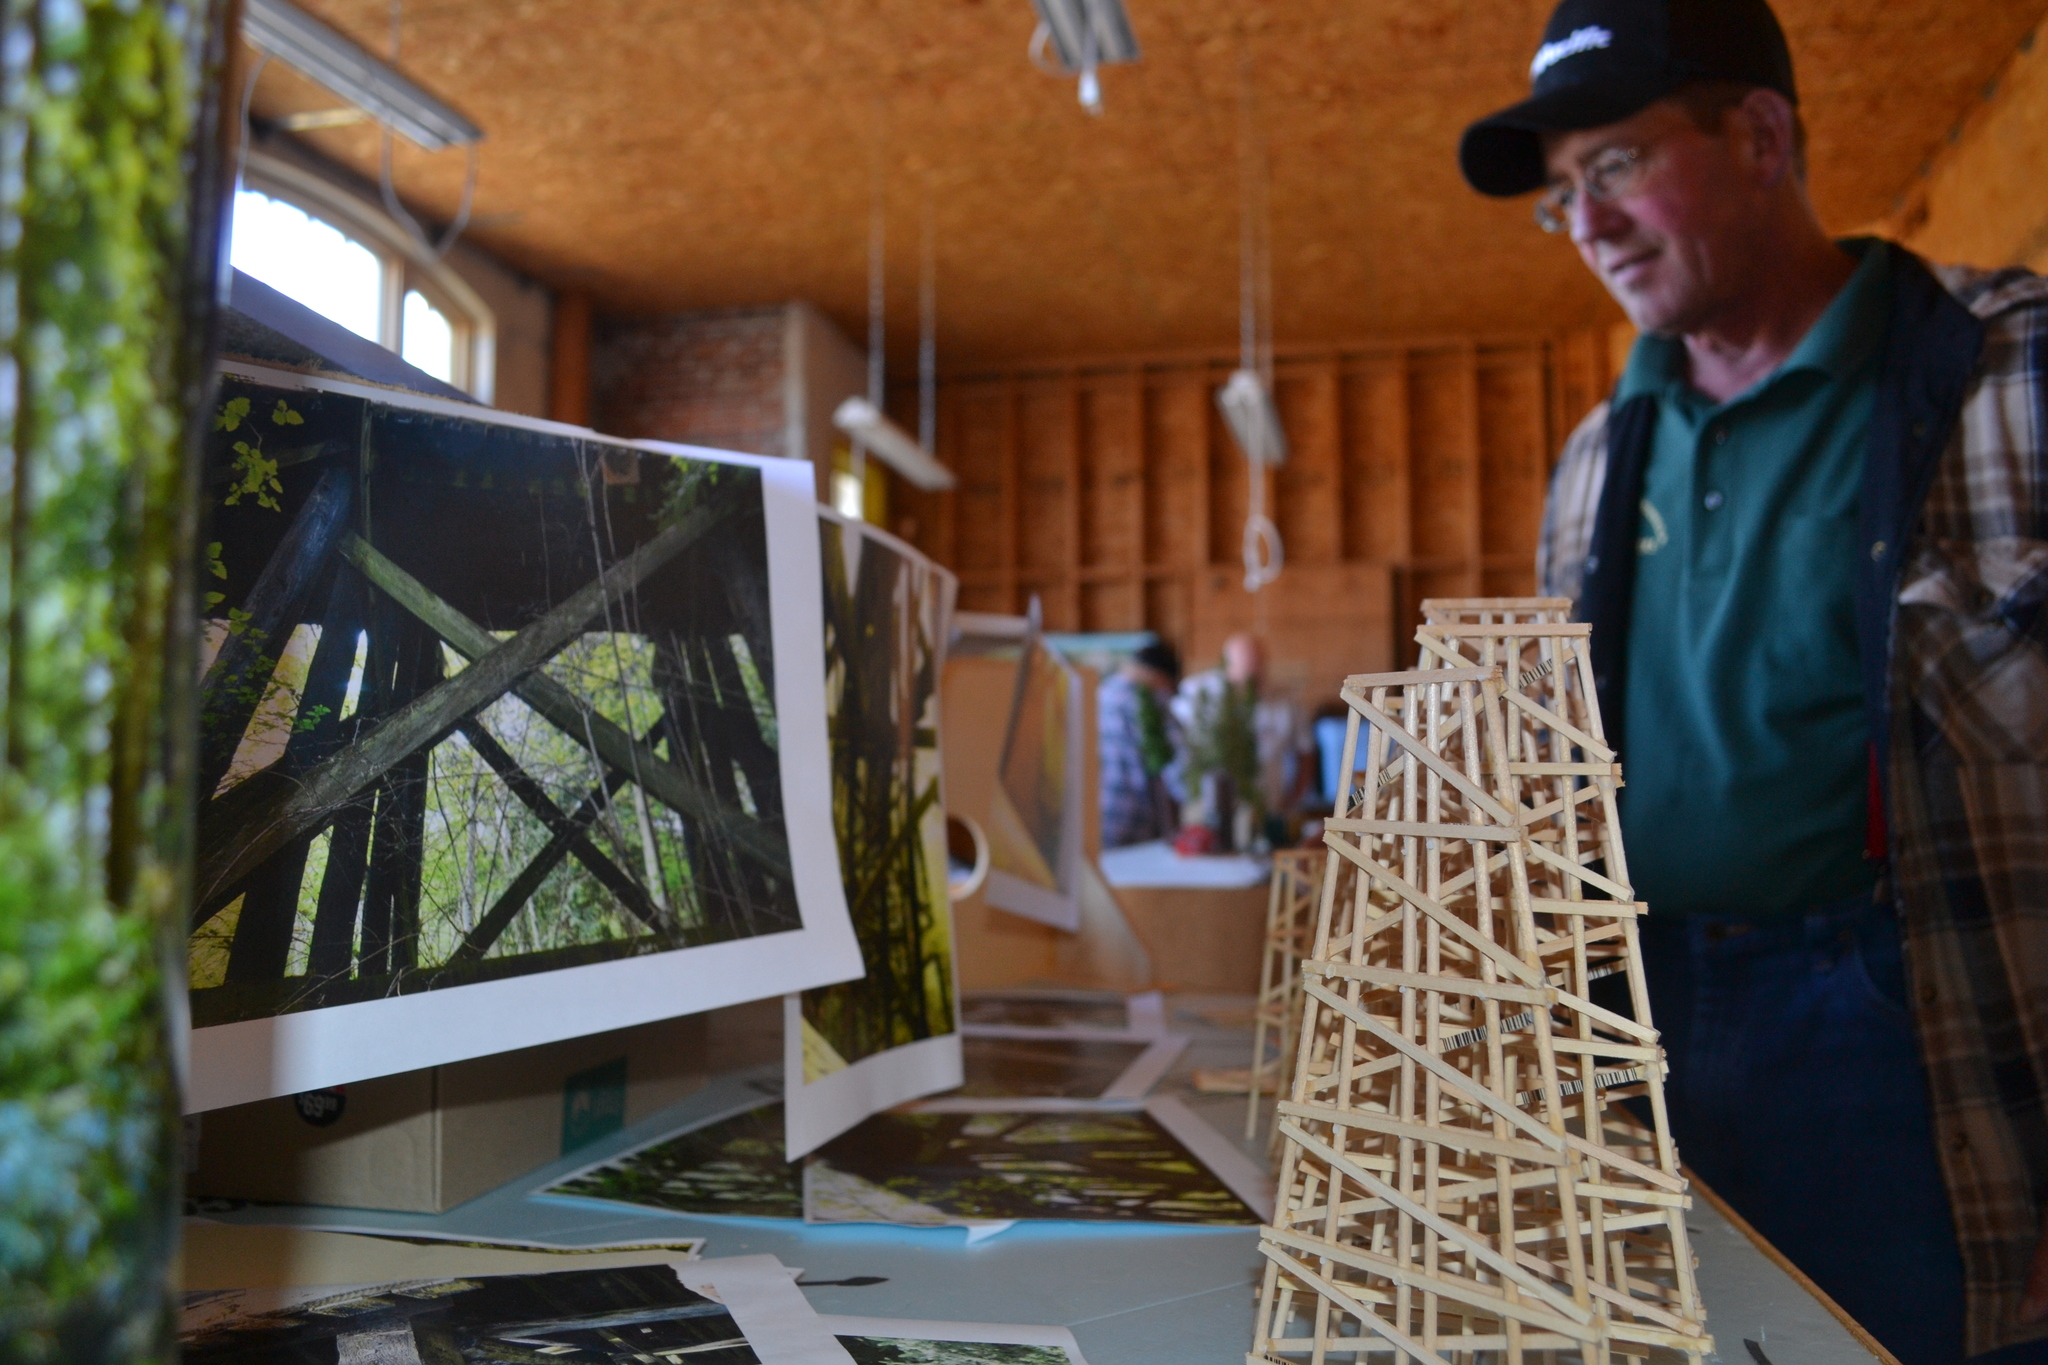 John Kumparak, vice president of the North Olympic Peninsula Railroaders, stands by the club’s replica of the Johnson Creek Trestle. As they work on it, club members say they are using individual photographs to ensure authenticity. (Matthew Nash/Olympic Peninsula News Group)